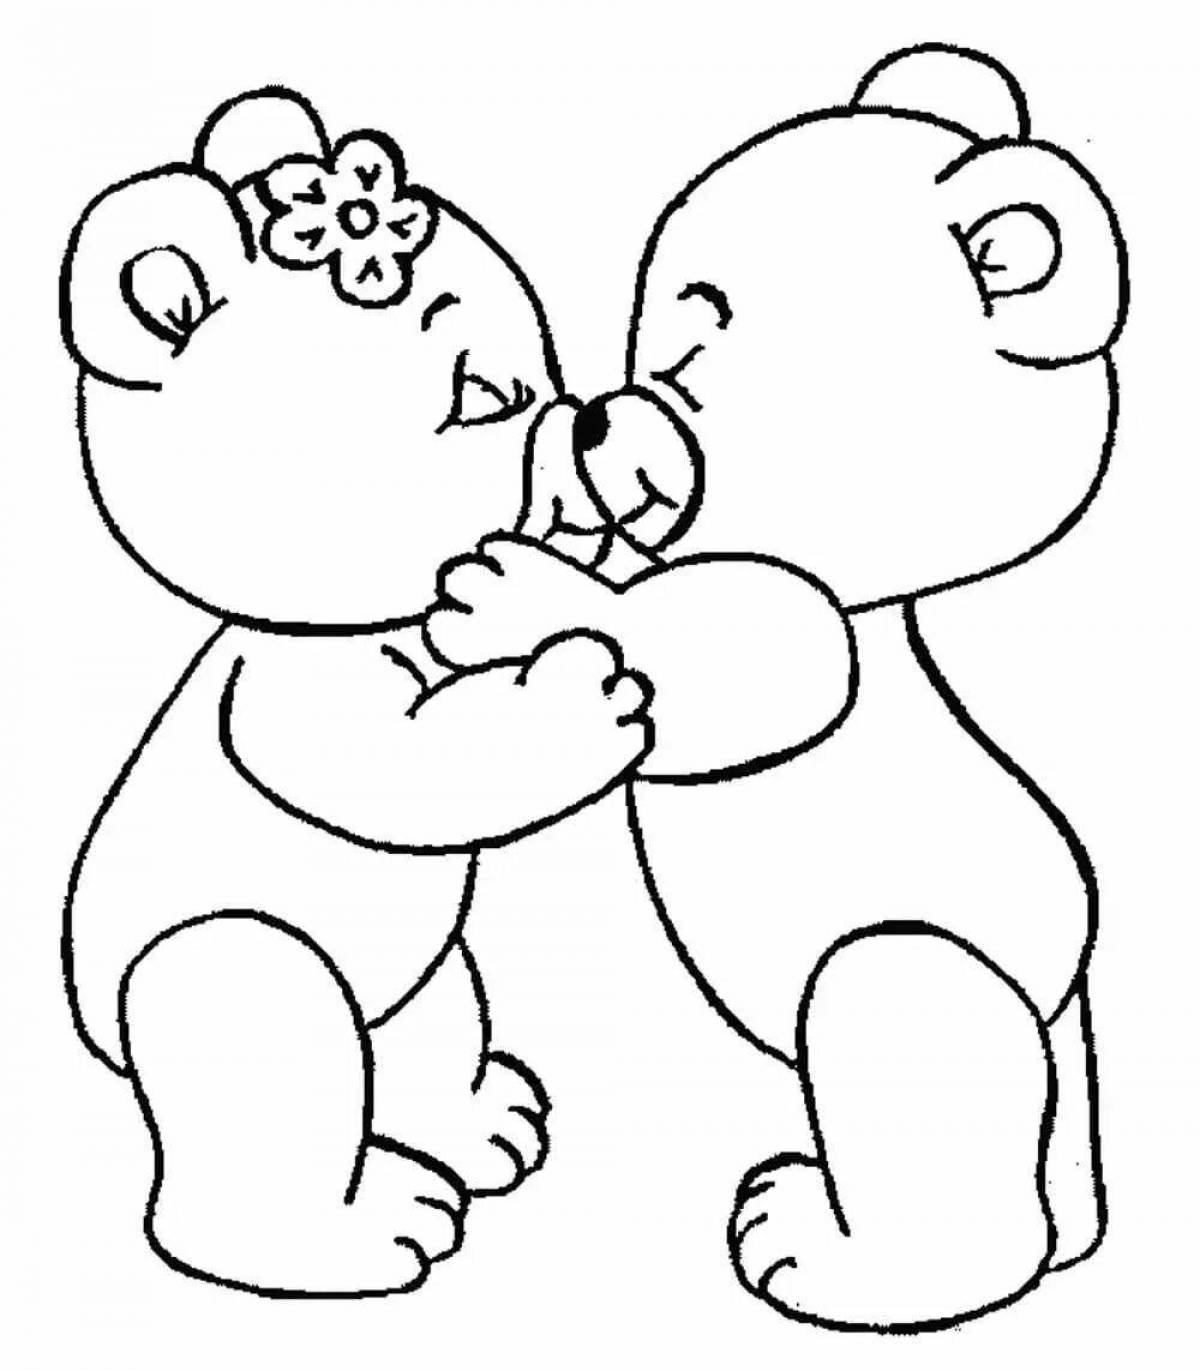 Cute and lovable teddy bear coloring book